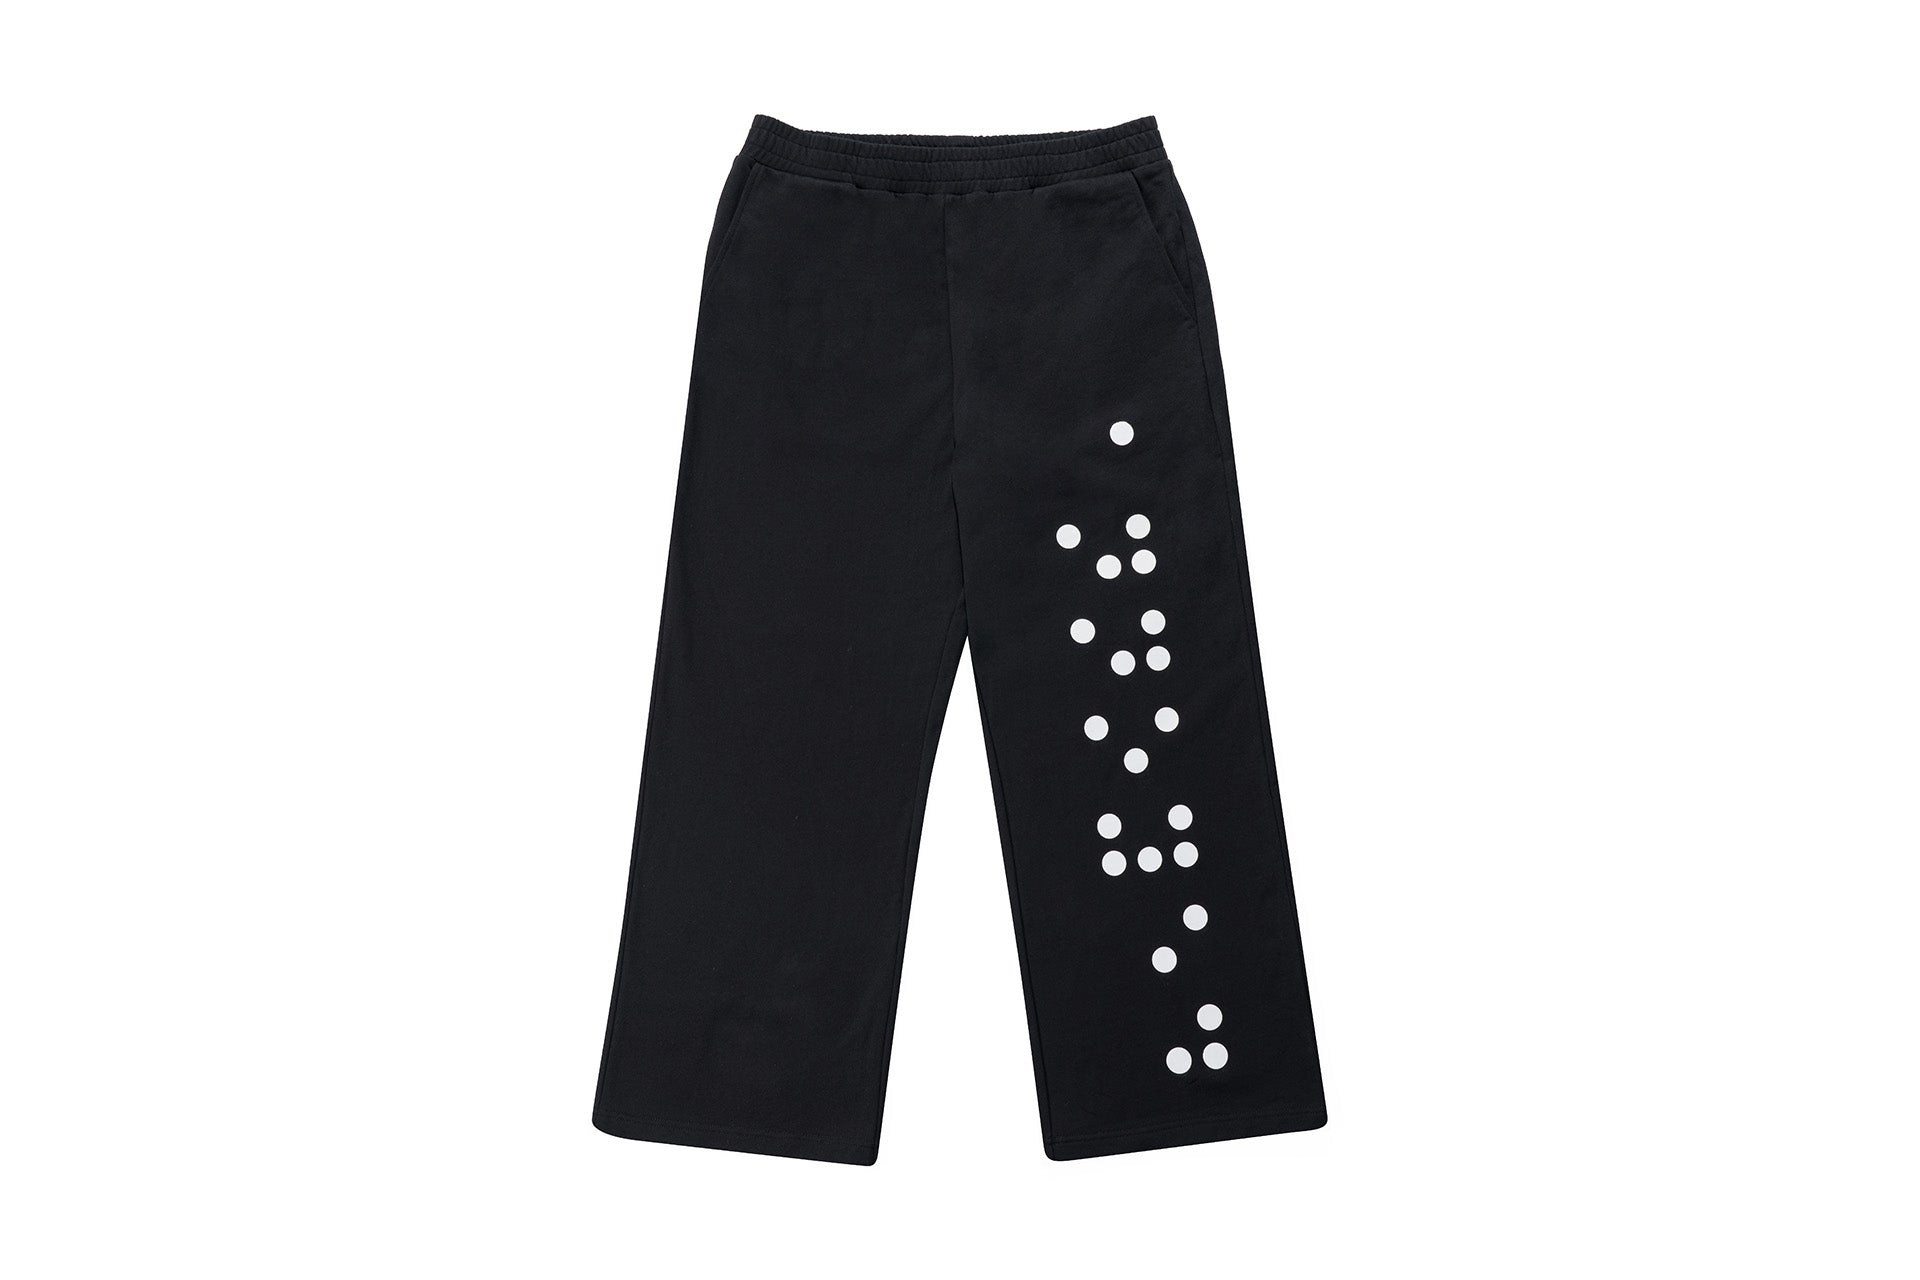 Annoyed Braille Sweatpants